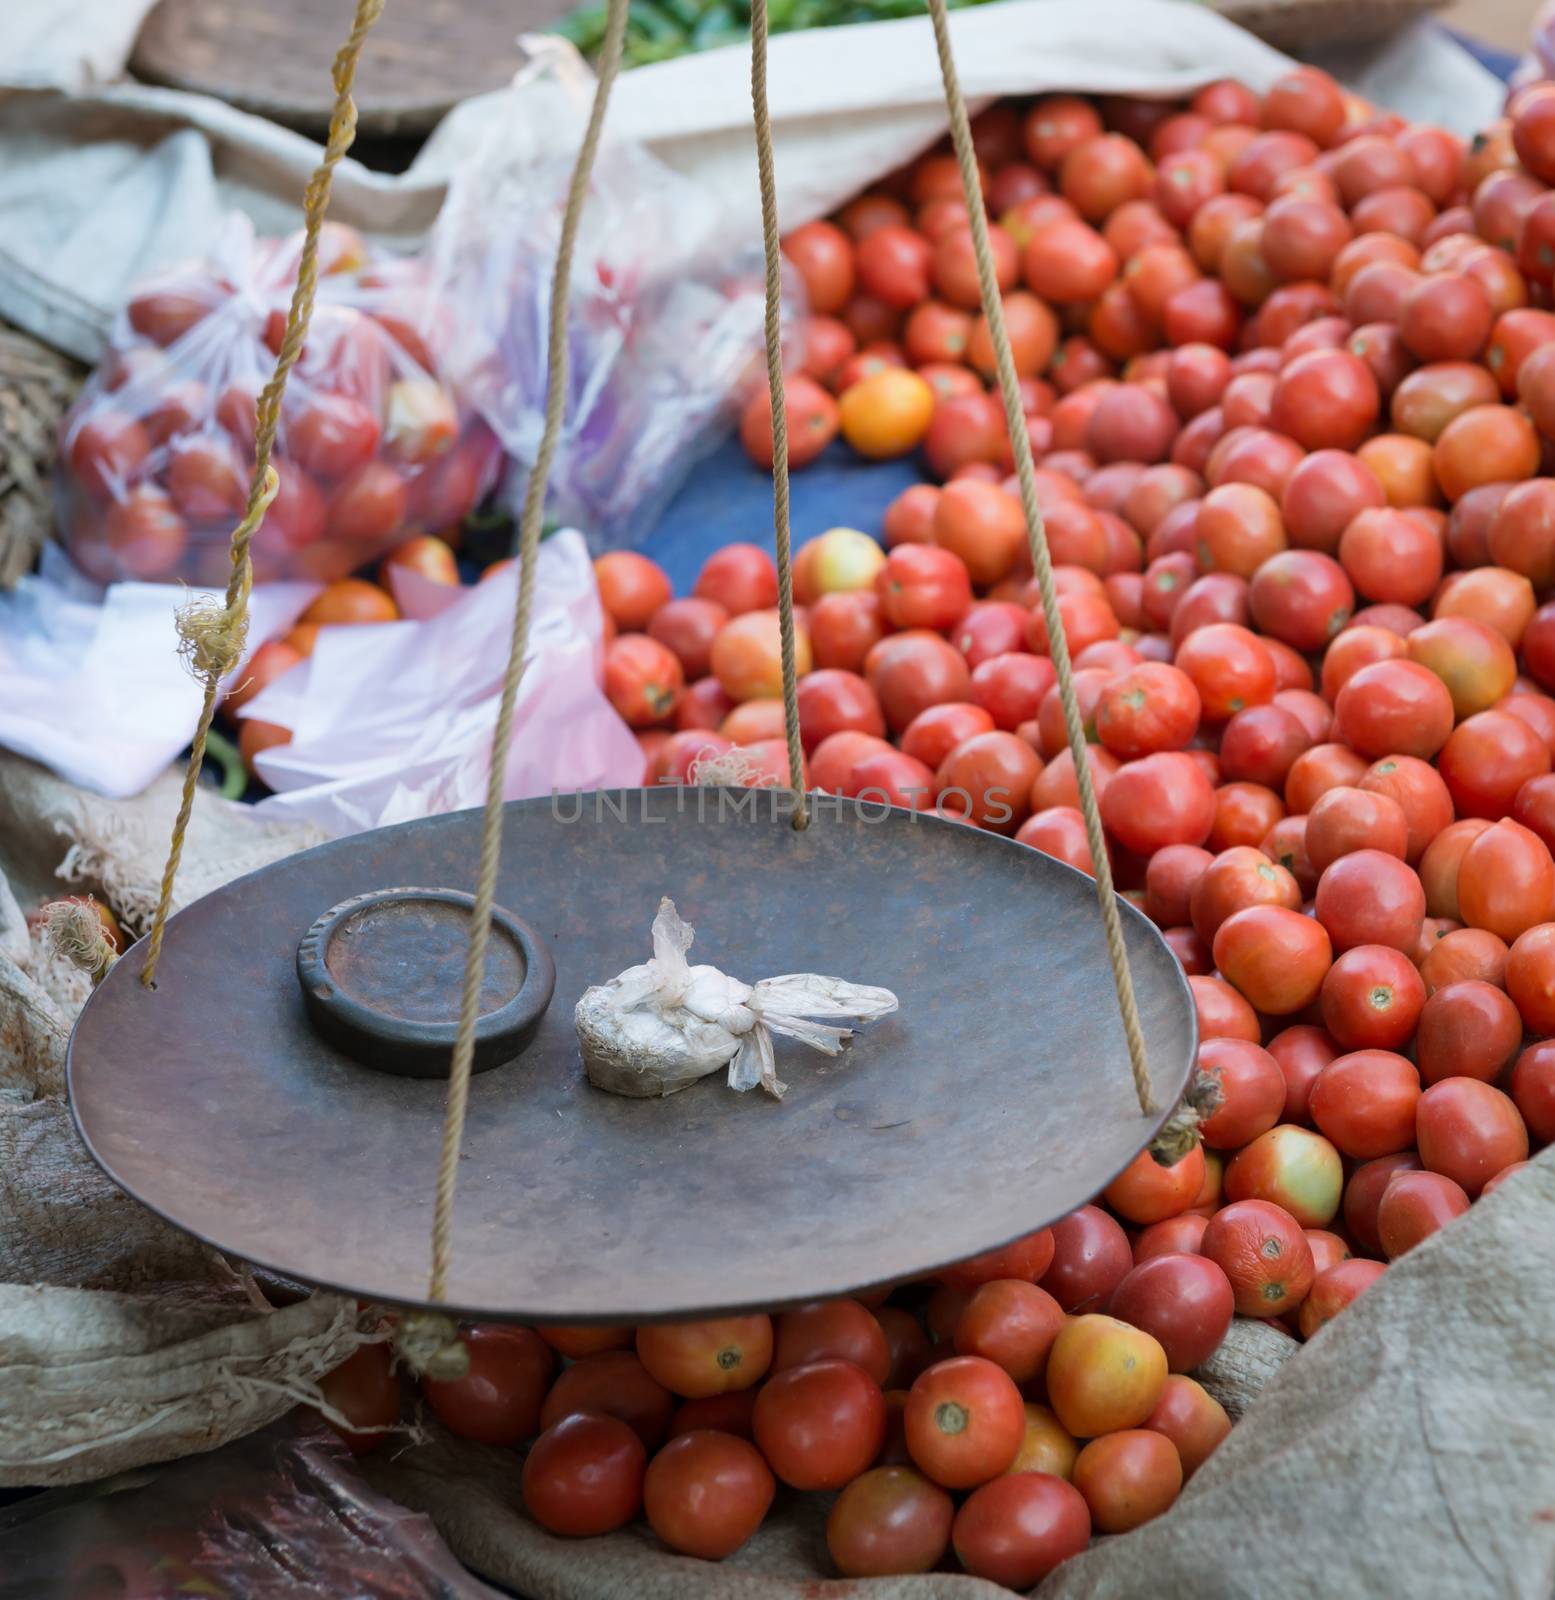 Metal scale pan of simple vintage balance with weight on traditional open market with tomato vegetables on background 